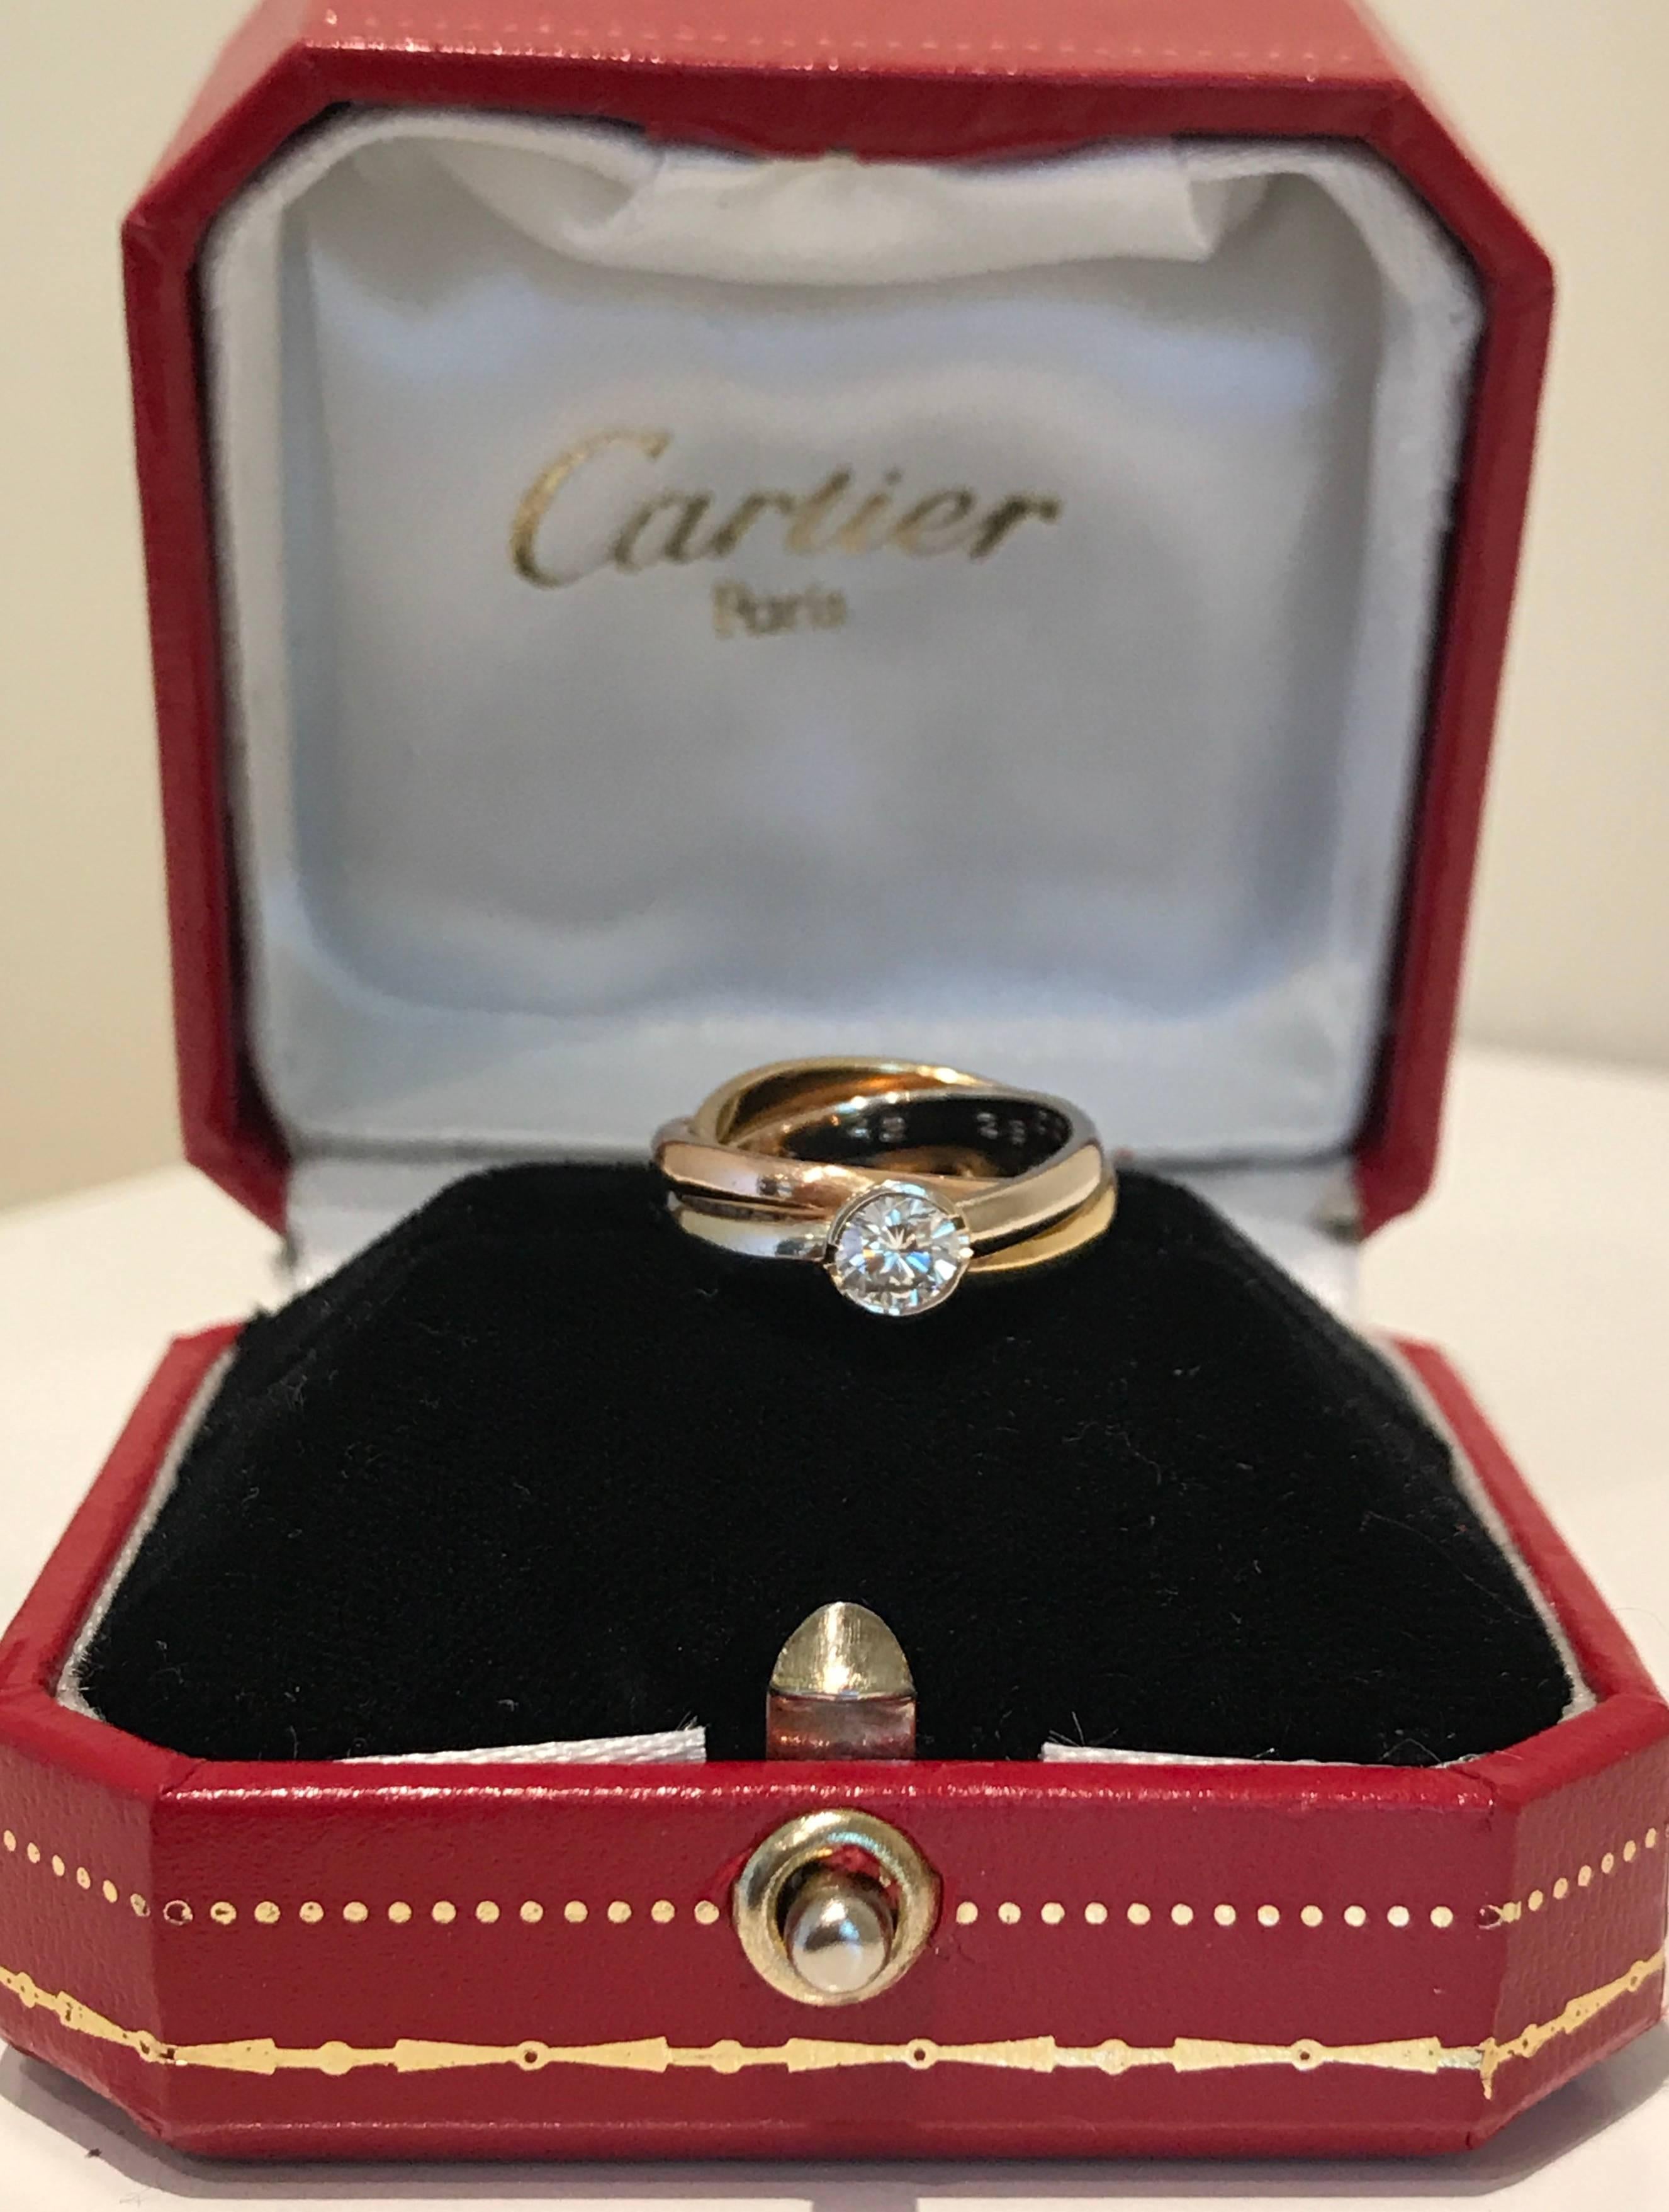 A Cartier tri-colour diamond solitaire diamond ring set in 18k gold. The ring features a tri-coloured rolling ring has white, yellow and rose gold bands interlocking and features a brilliant cut round diamond of approx 0.50 carat in weight.